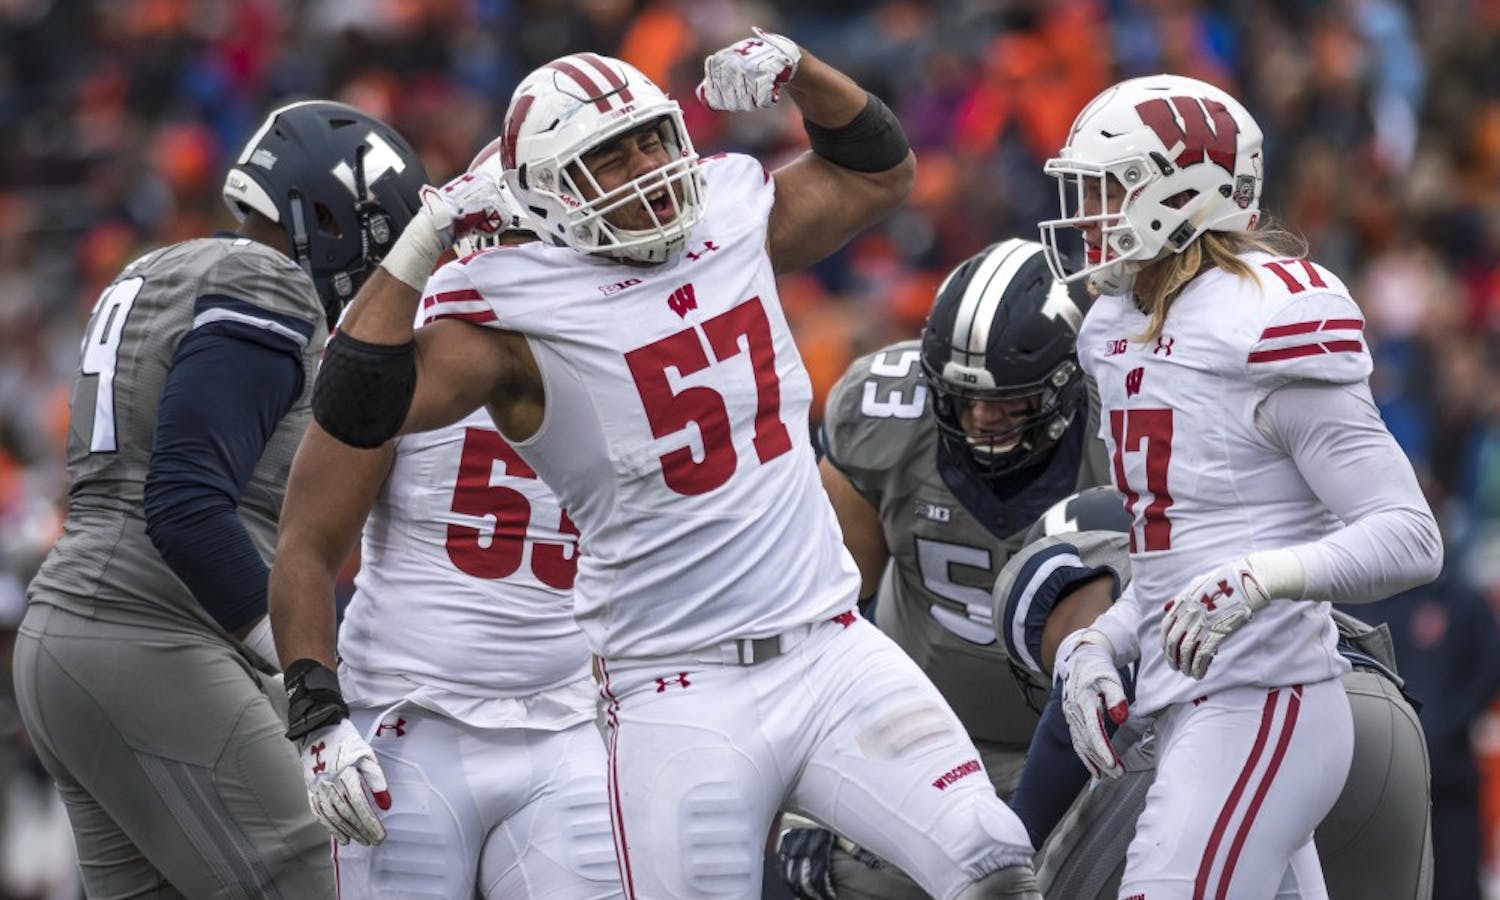 Gallery: Wisconsin remains undefeated with 24-10 win over Illinois